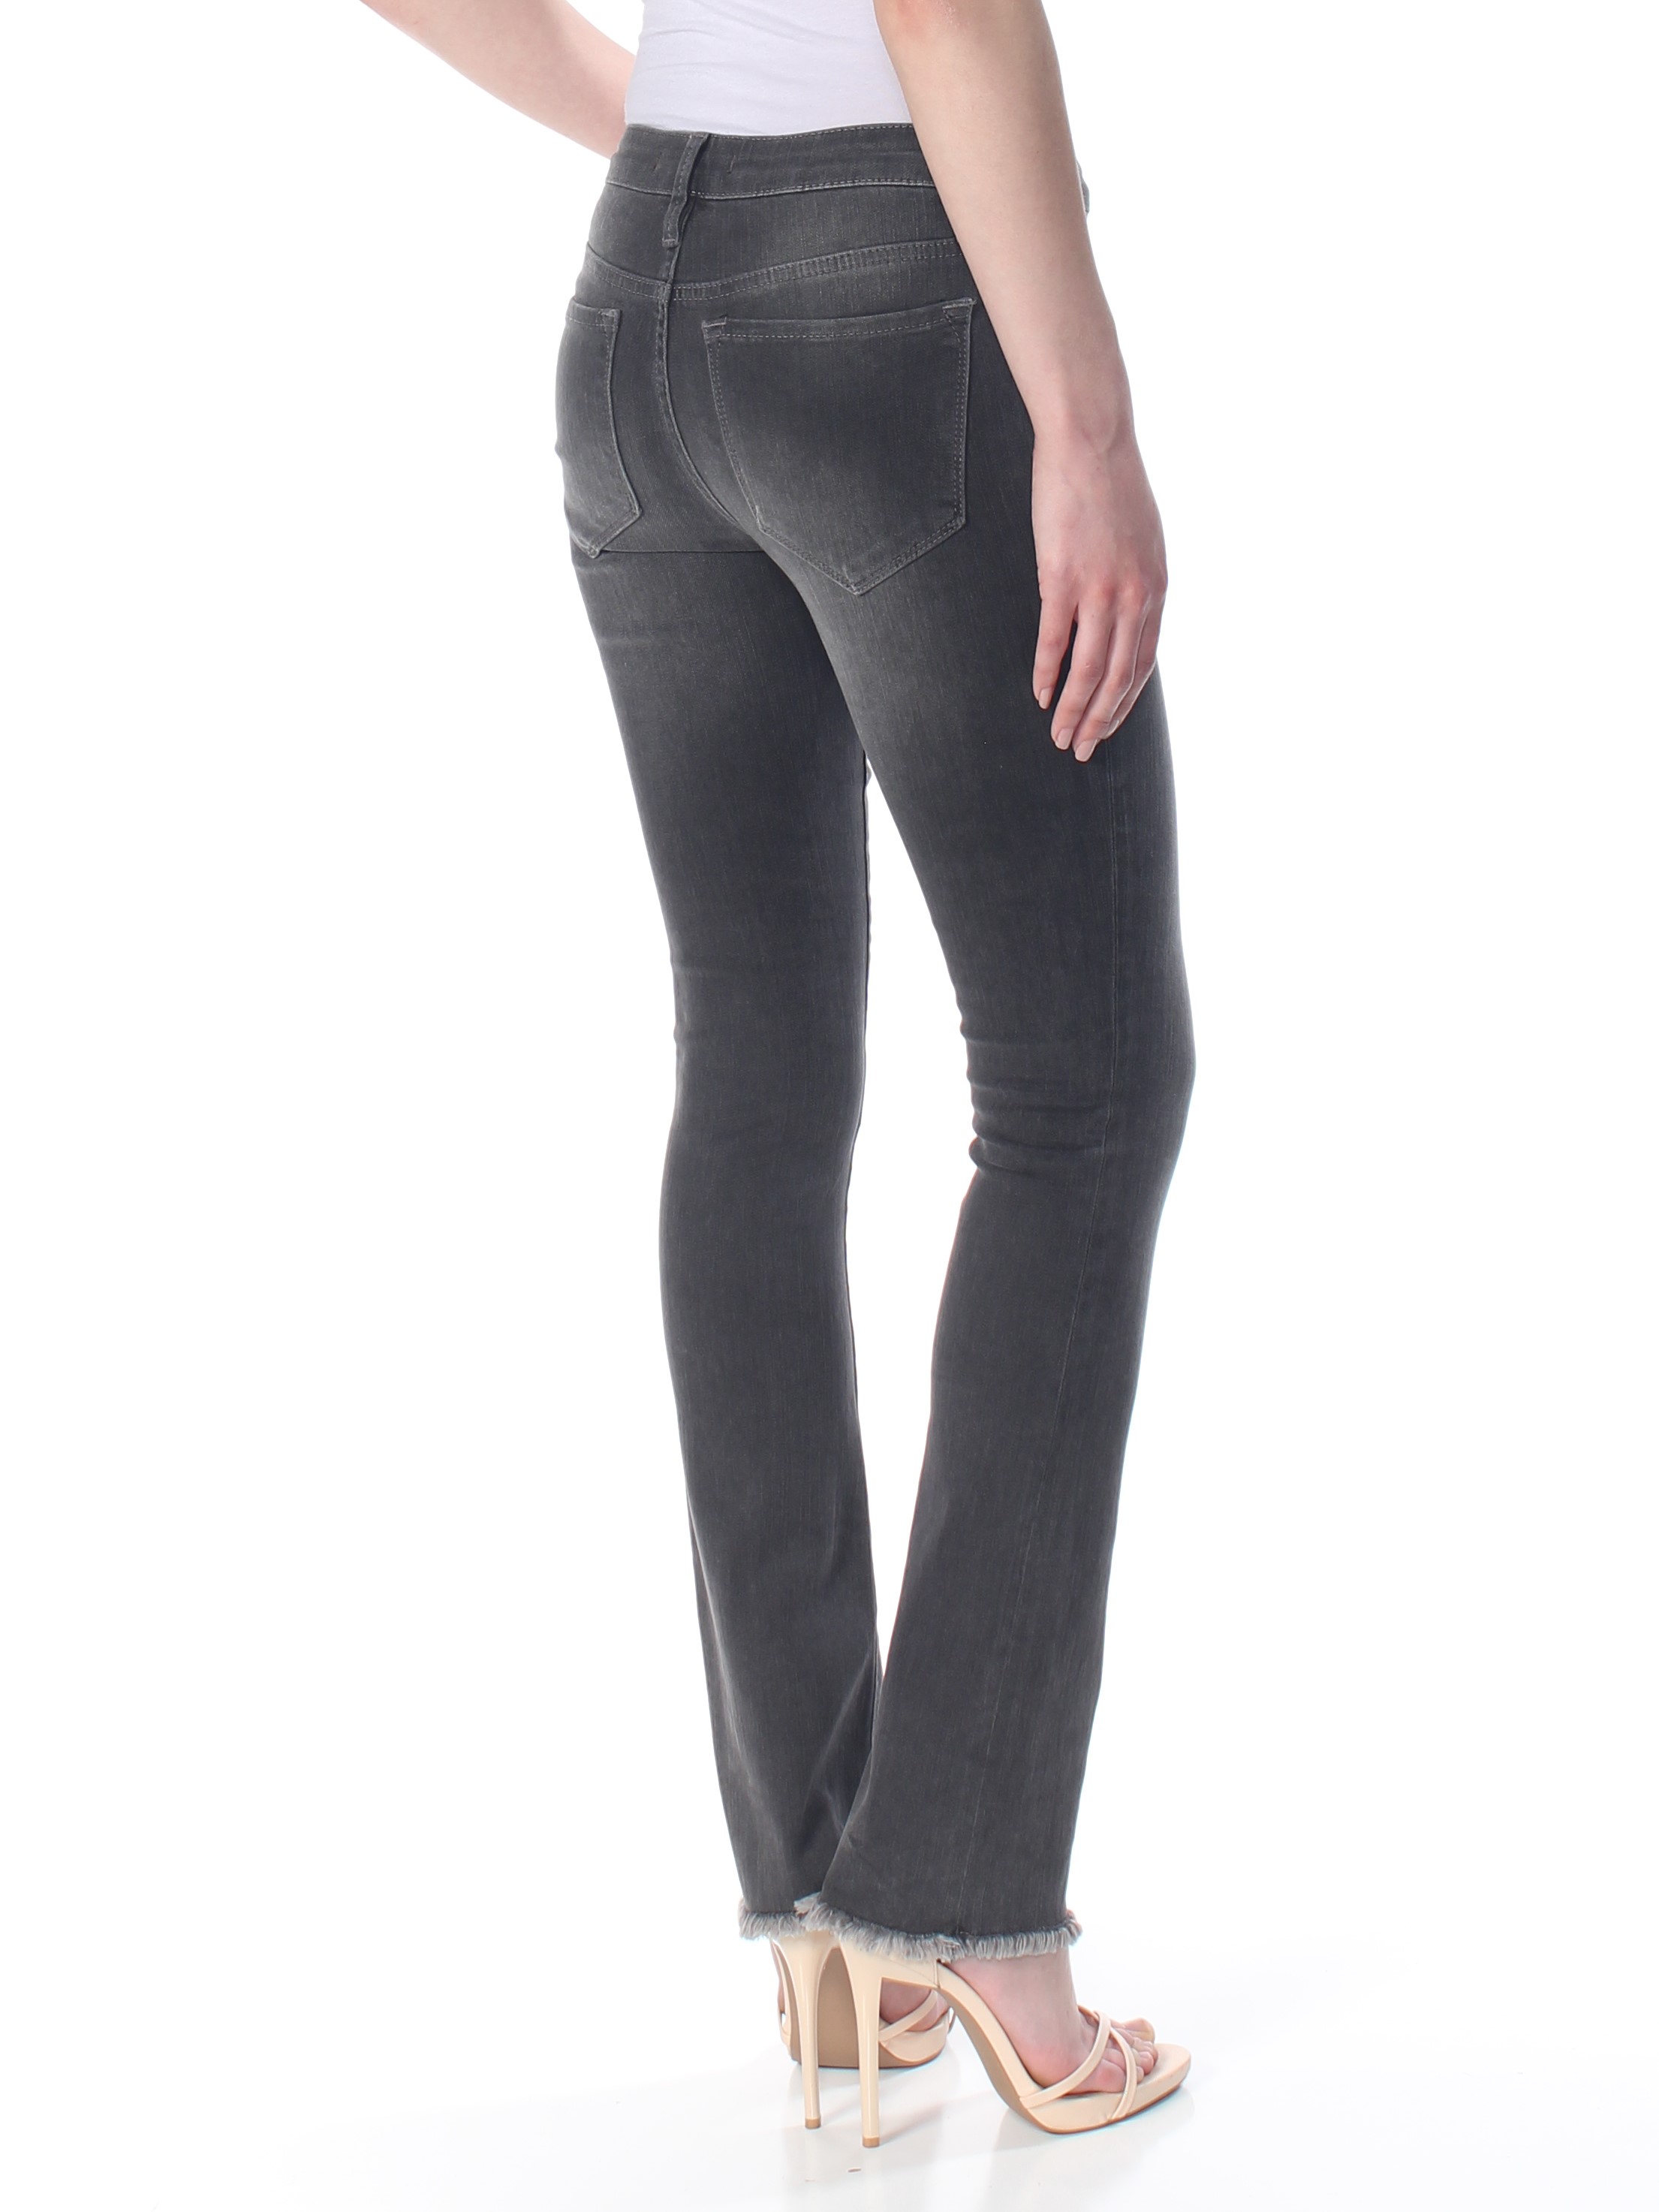 FREE PEOPLE $78 Womens 1052 Black Zippered Pocketed Frayed Skinny Jeans 24 WAIST - image 4 of 4